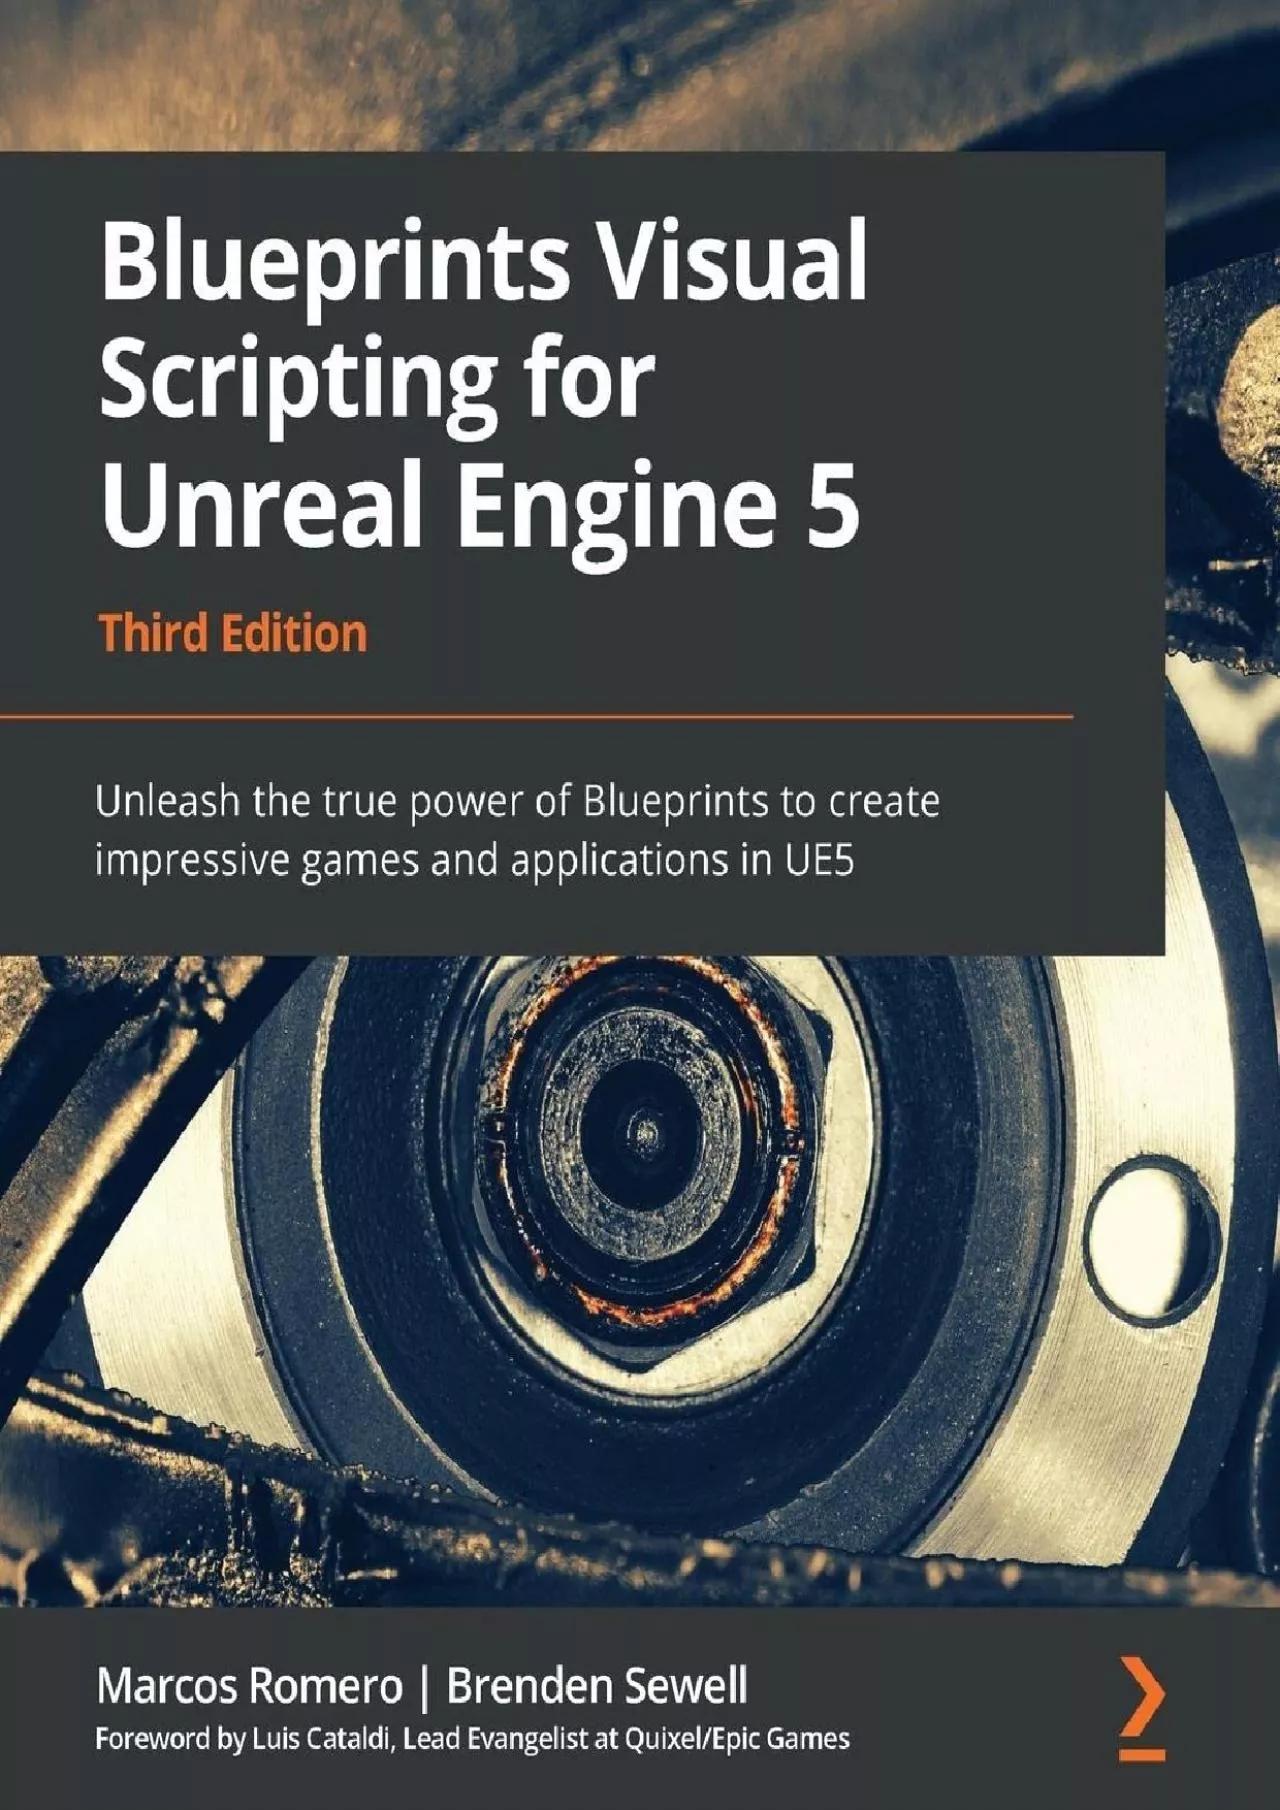 [READING BOOK]-Blueprints Visual Scripting for Unreal Engine 5: Unleash the true power